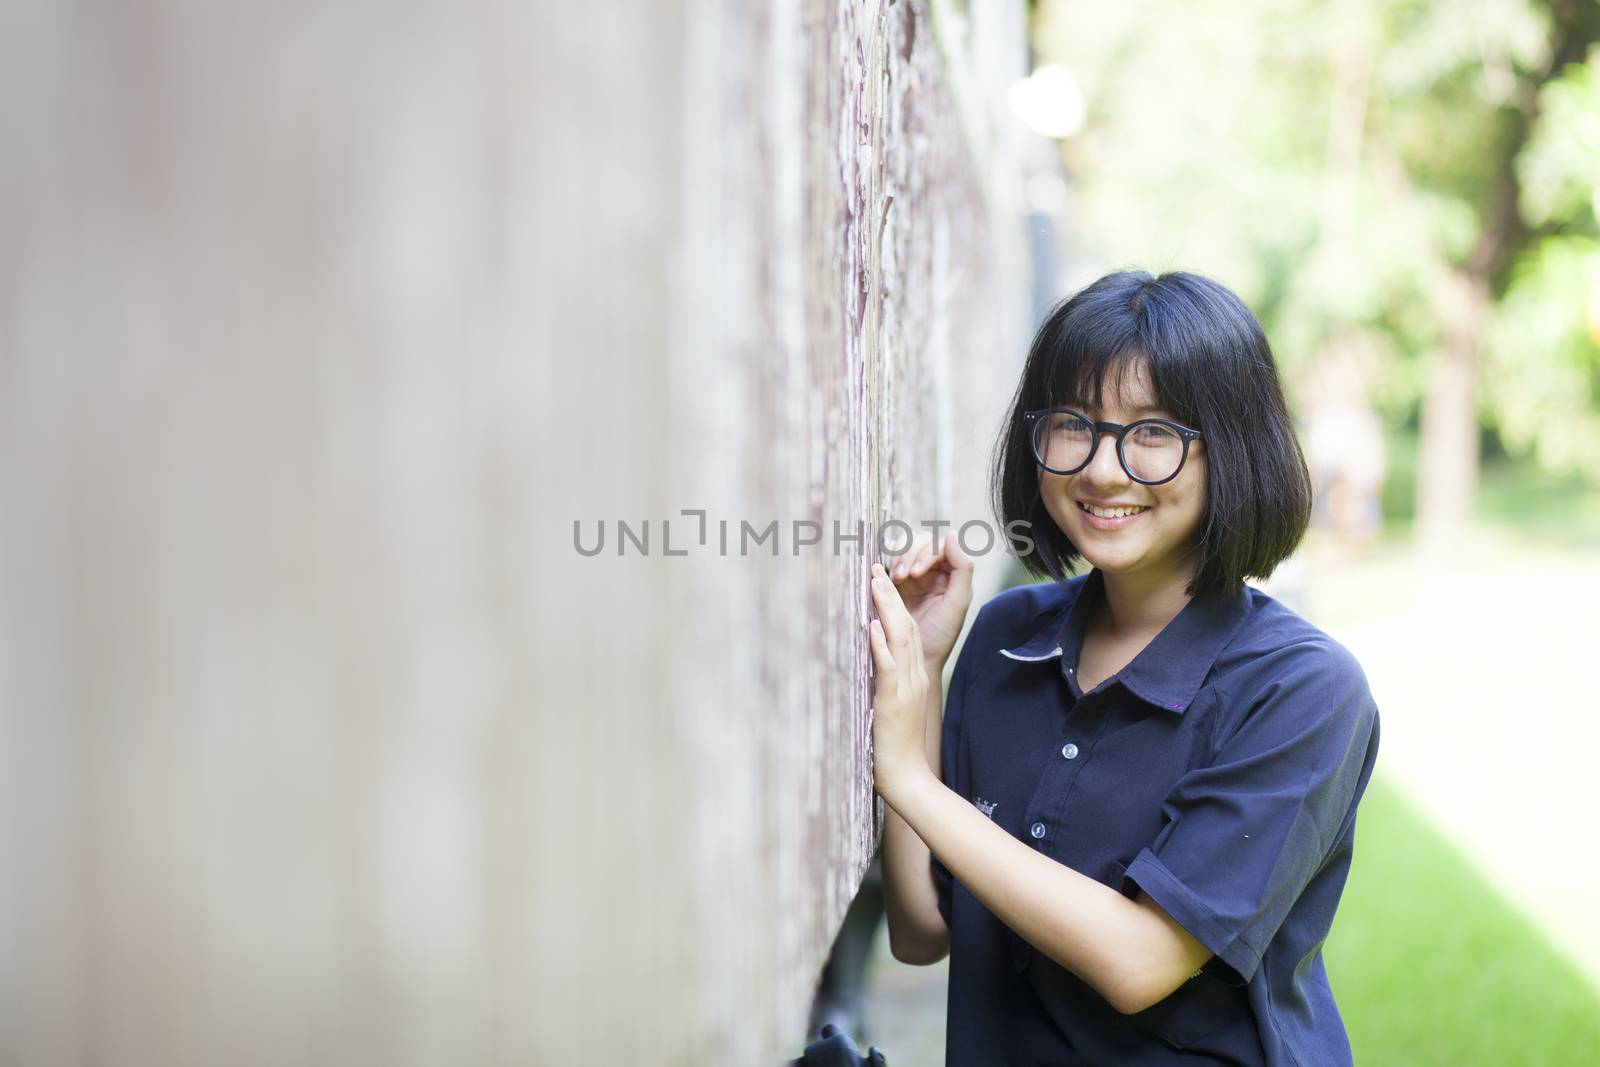 Portrait Girl with short hair and glasses. Smiling a happy holiday in the park.